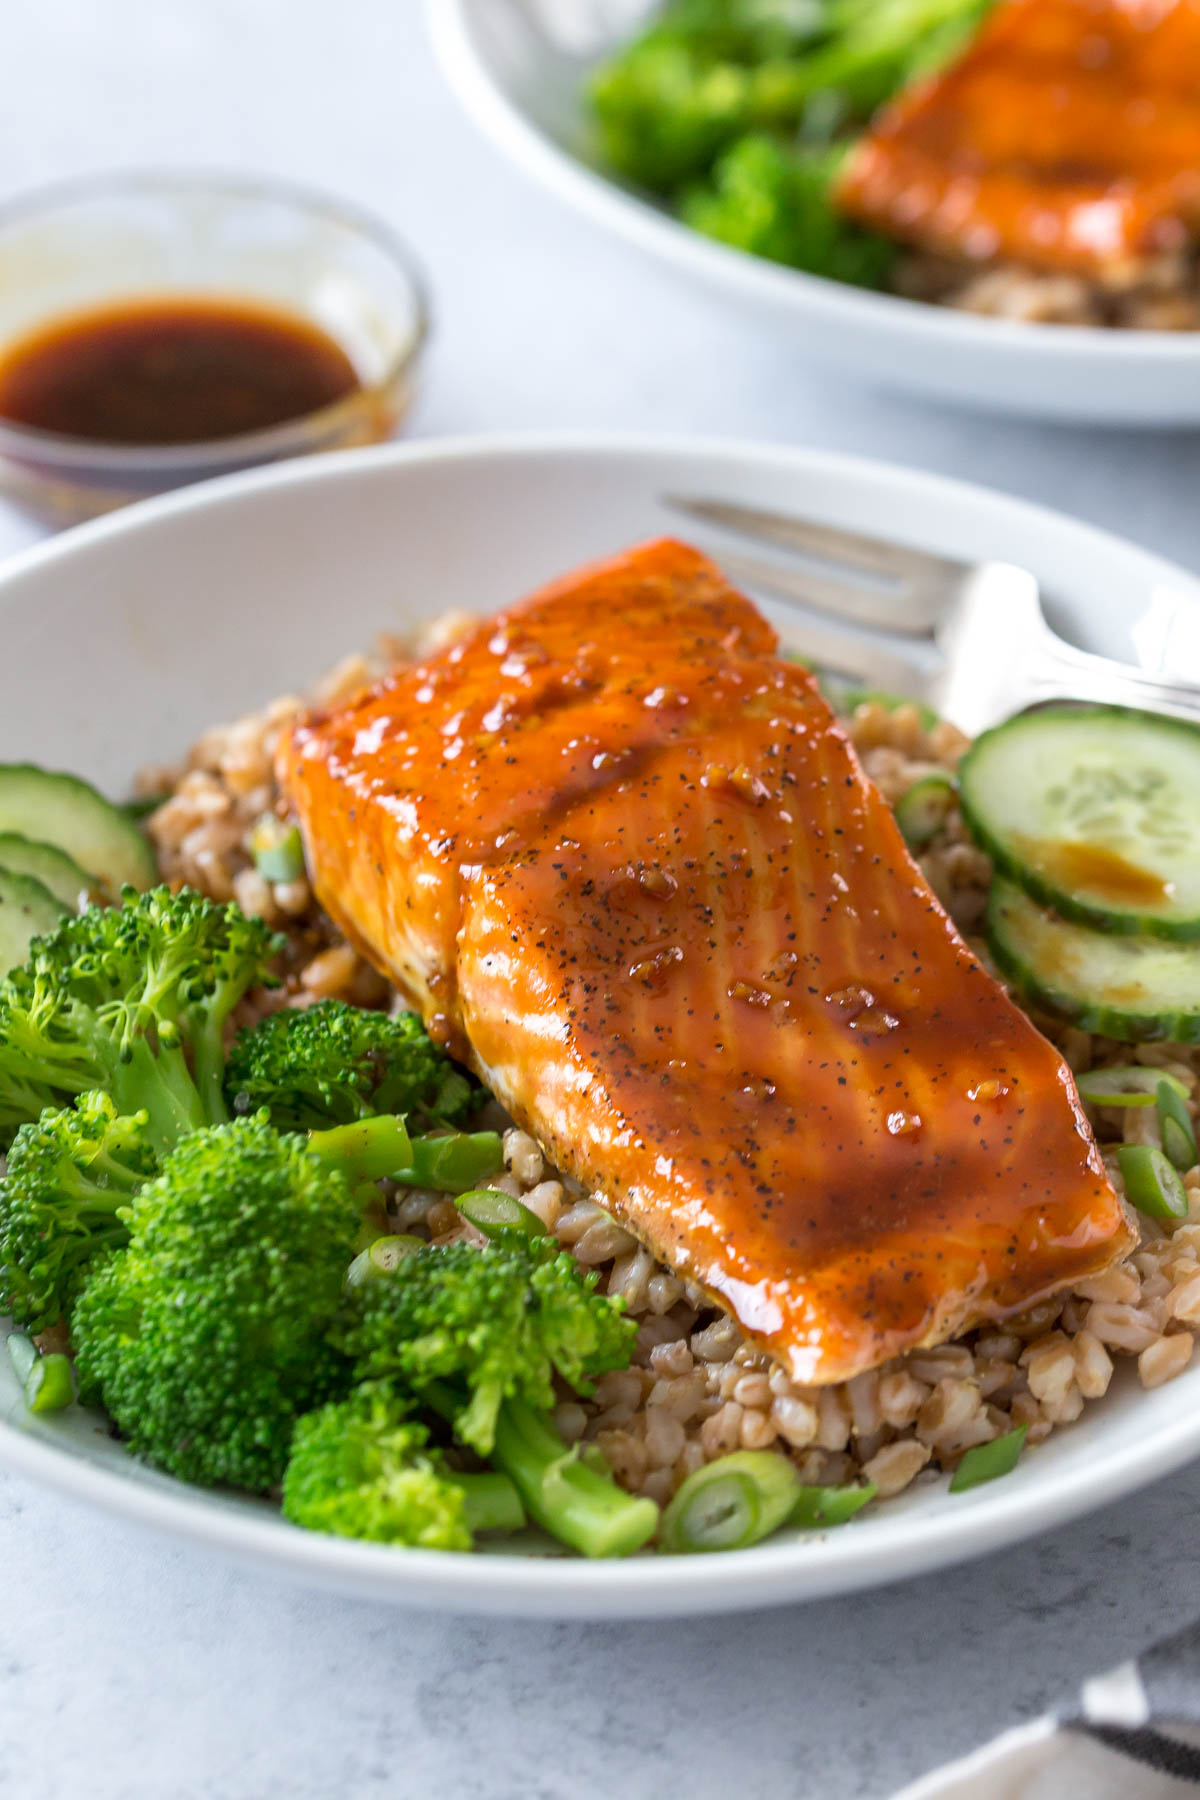 maple glazed salmon on a dinner plate filled with rice, broccoli, and garnished with cucumbers